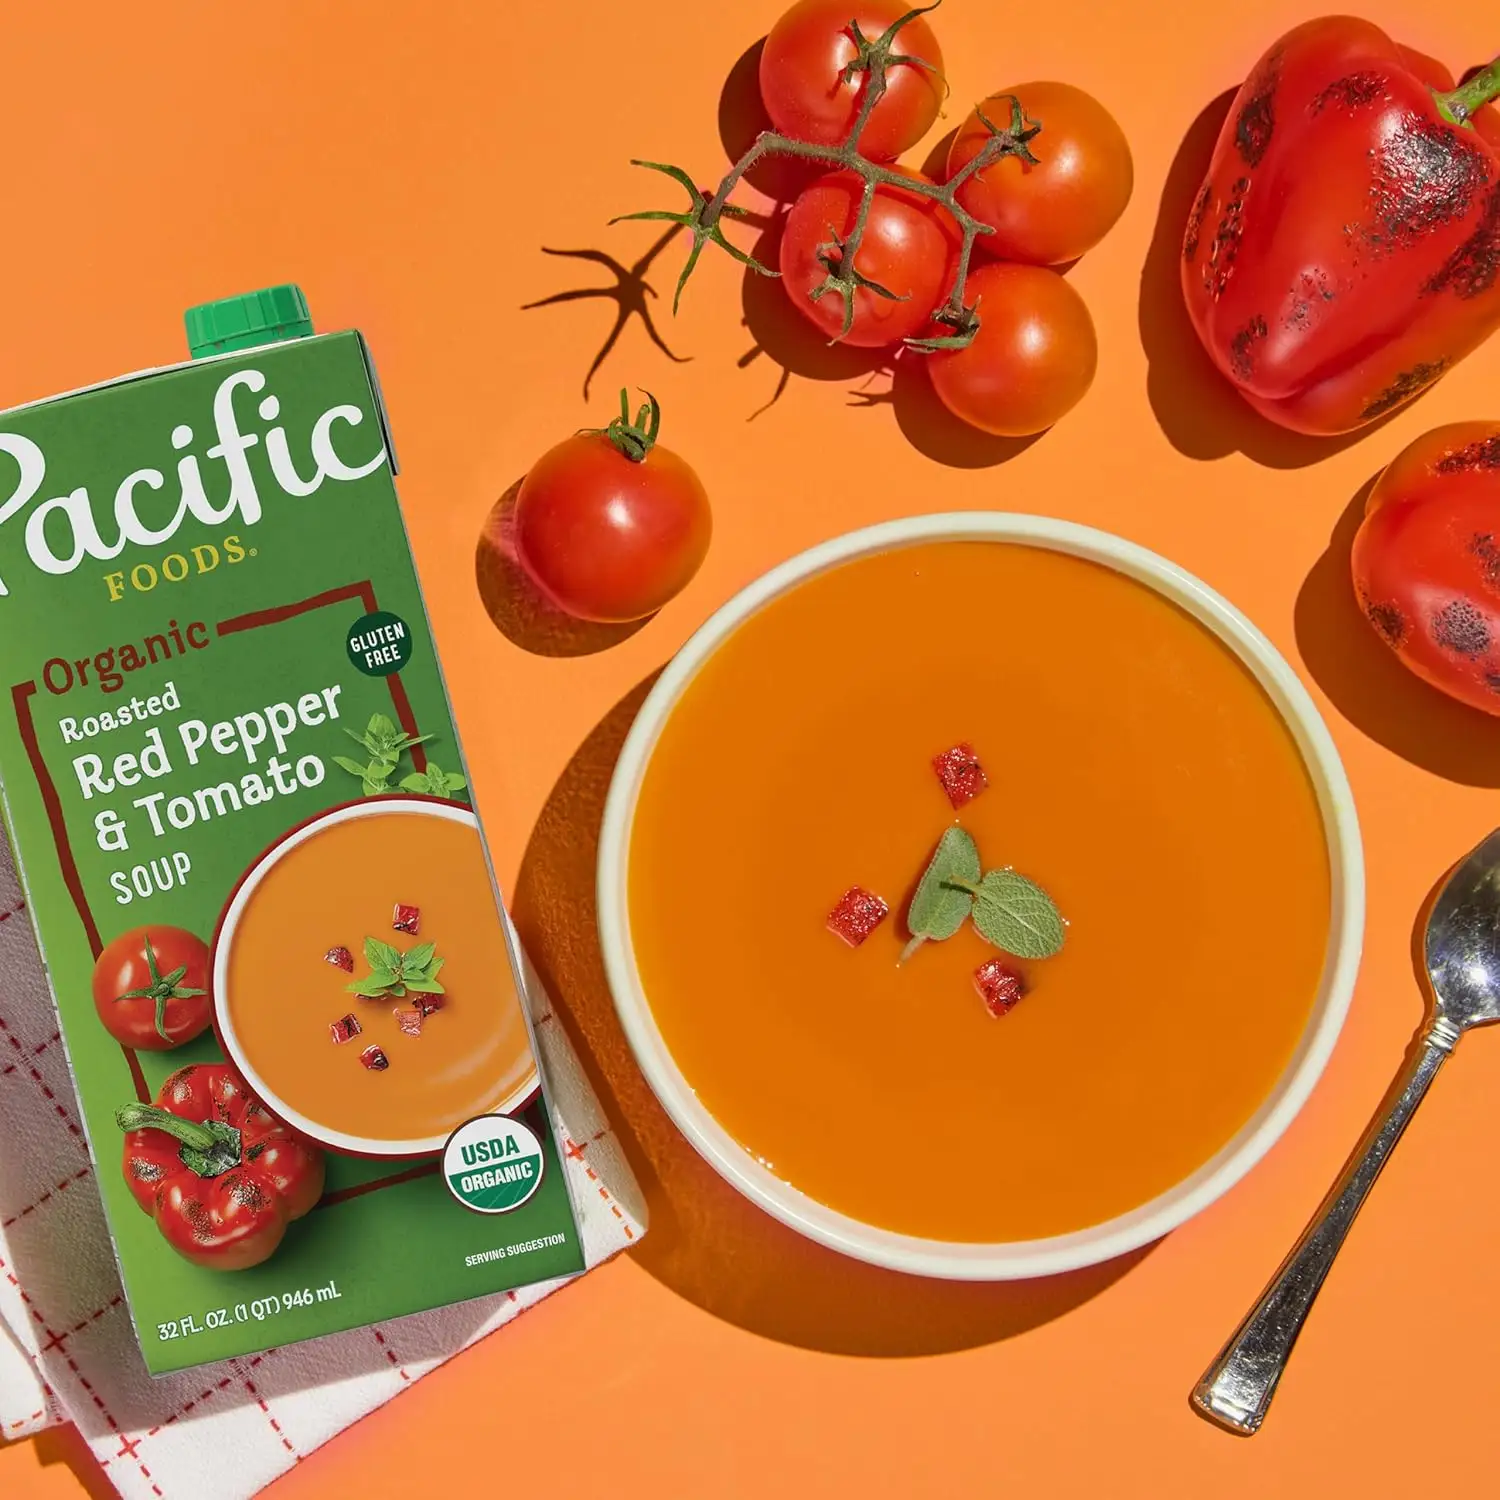 32oz. Pacific Foods Organic Soup: Roasted Red Pepper & Tomato, Tomato Basil